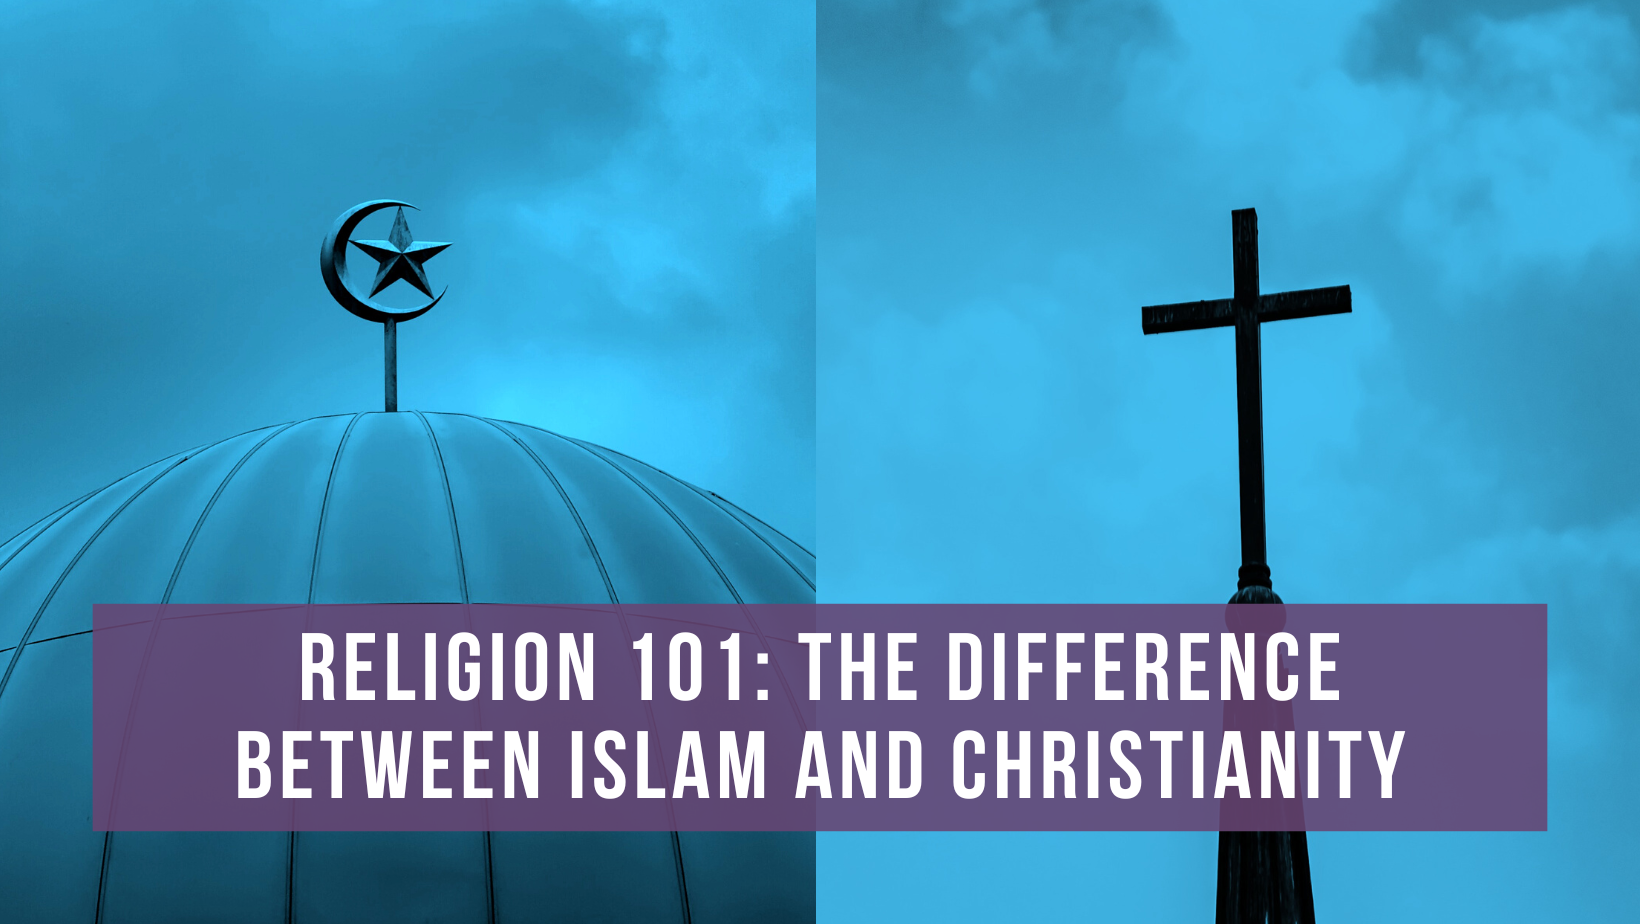 Religion 101: The difference between Islam and Christianity